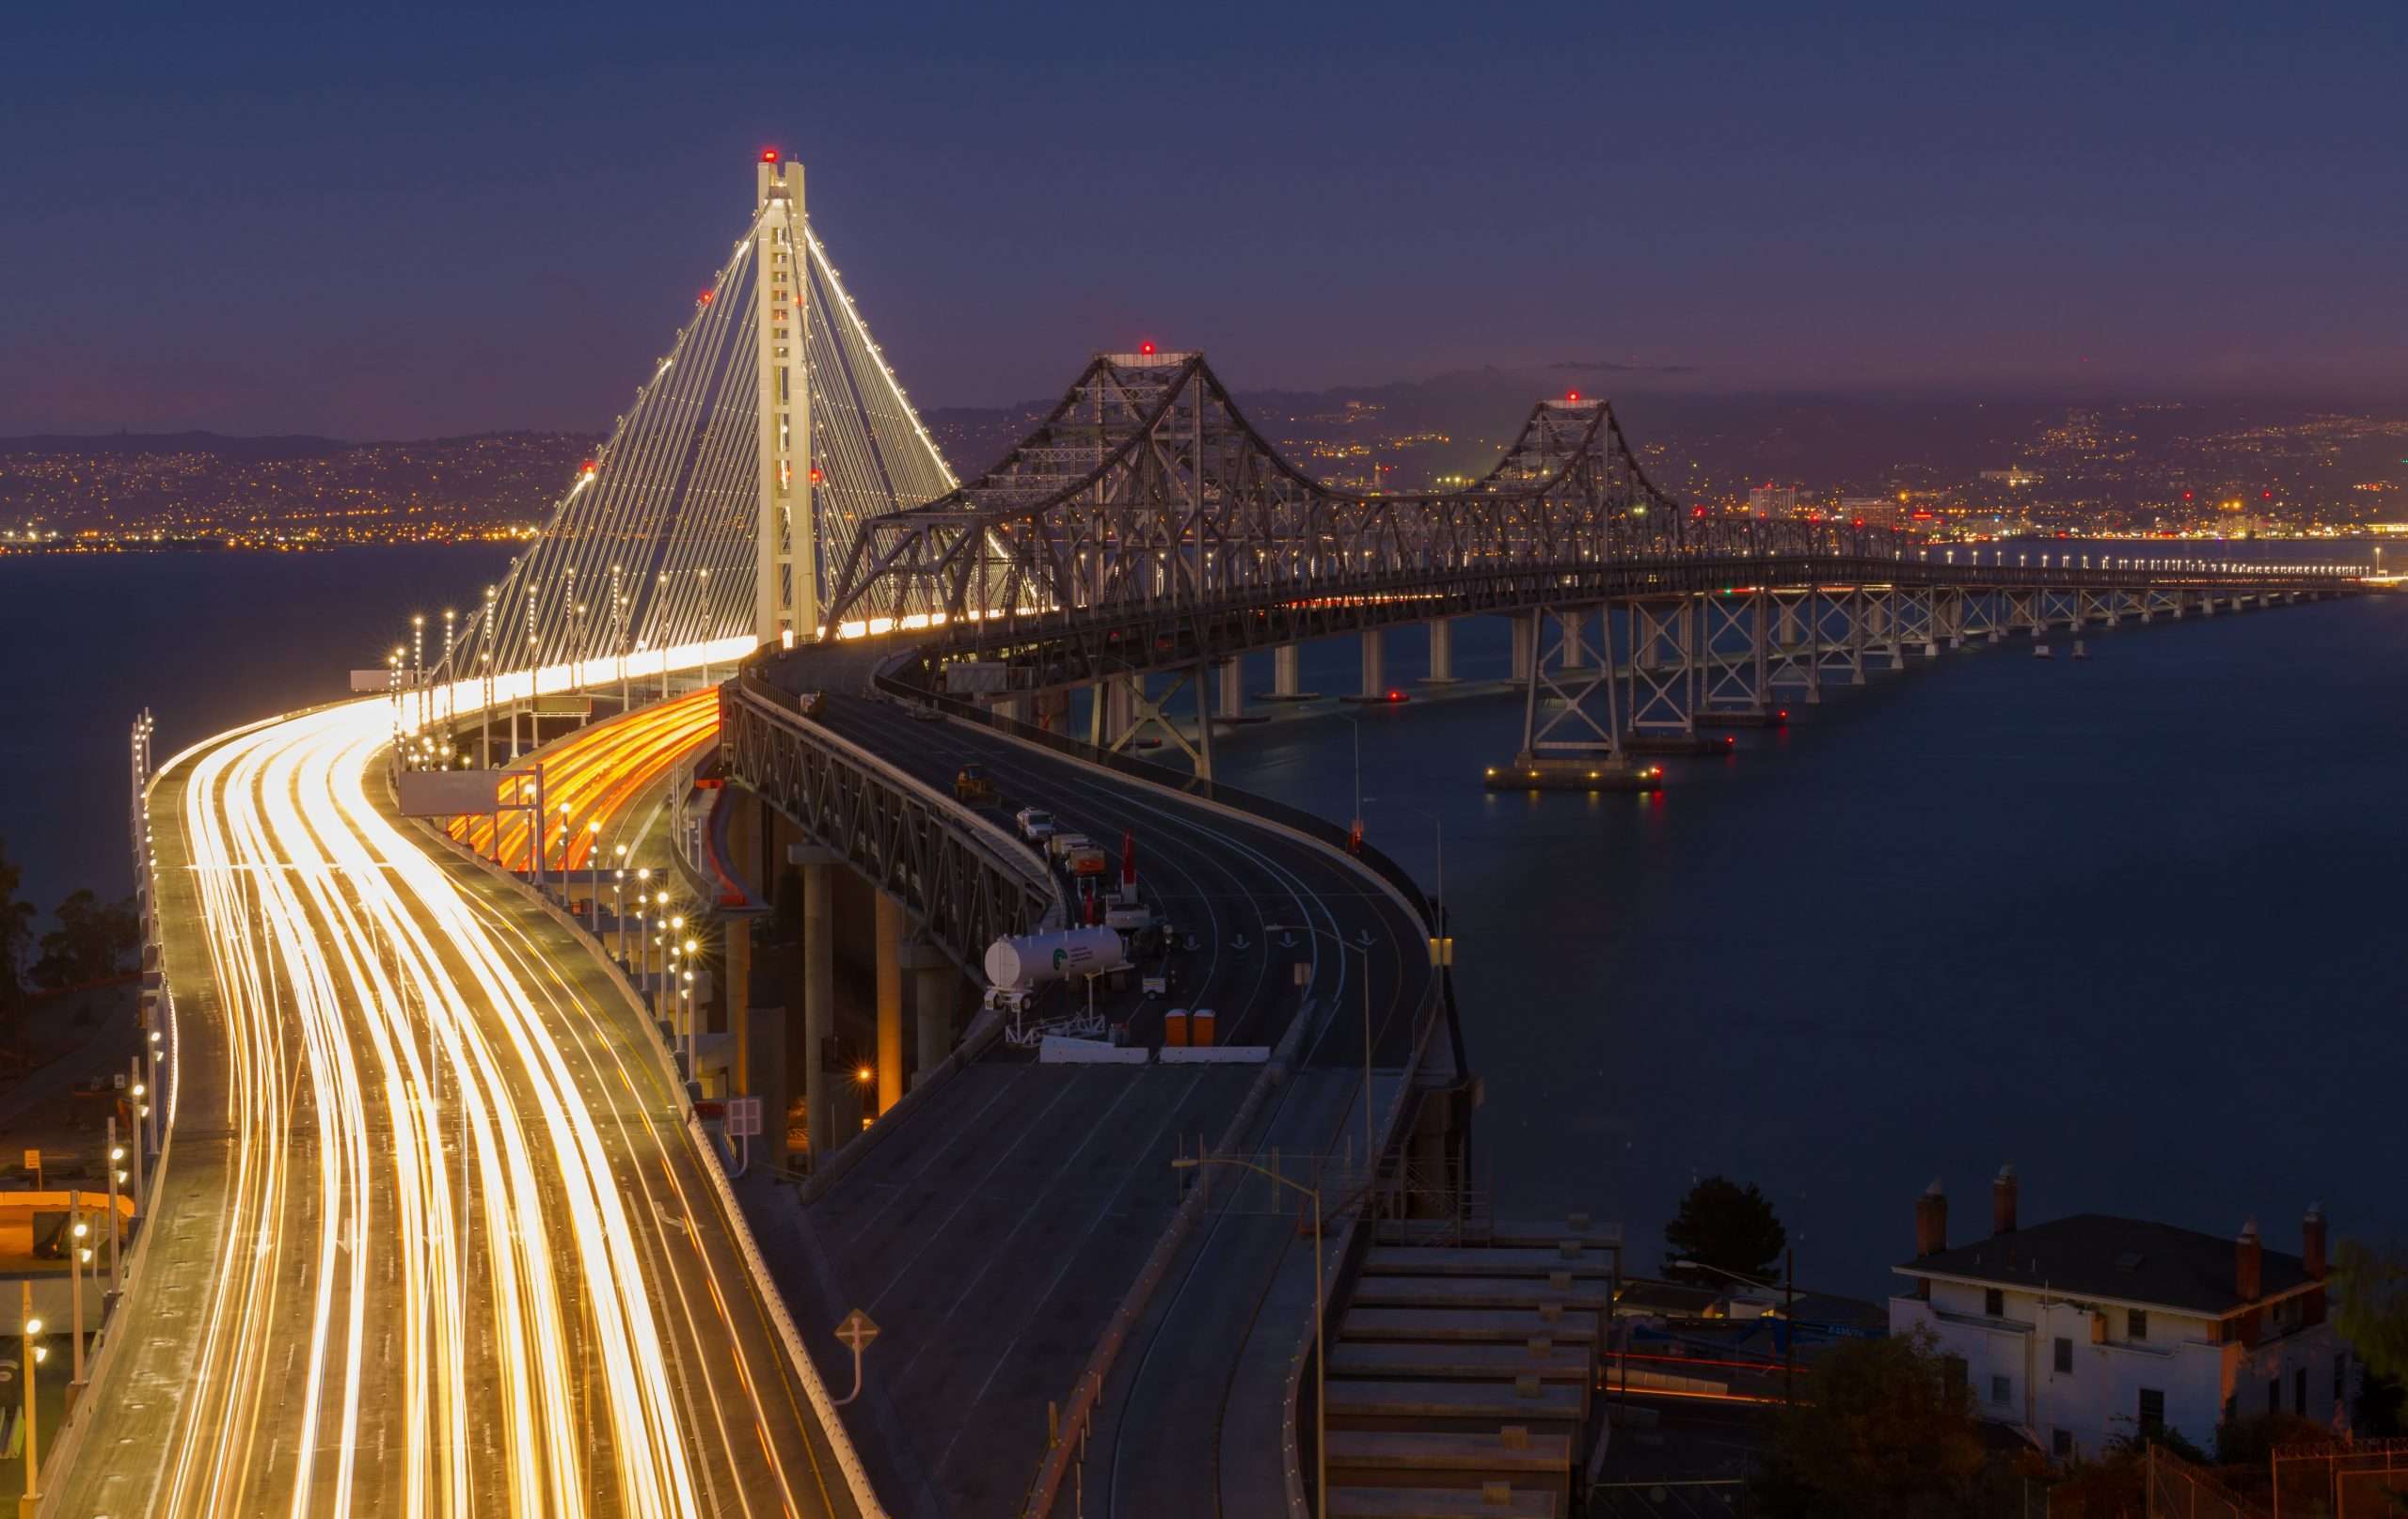 Pictures of cars going fast on golden state bridge in San Francisco, California